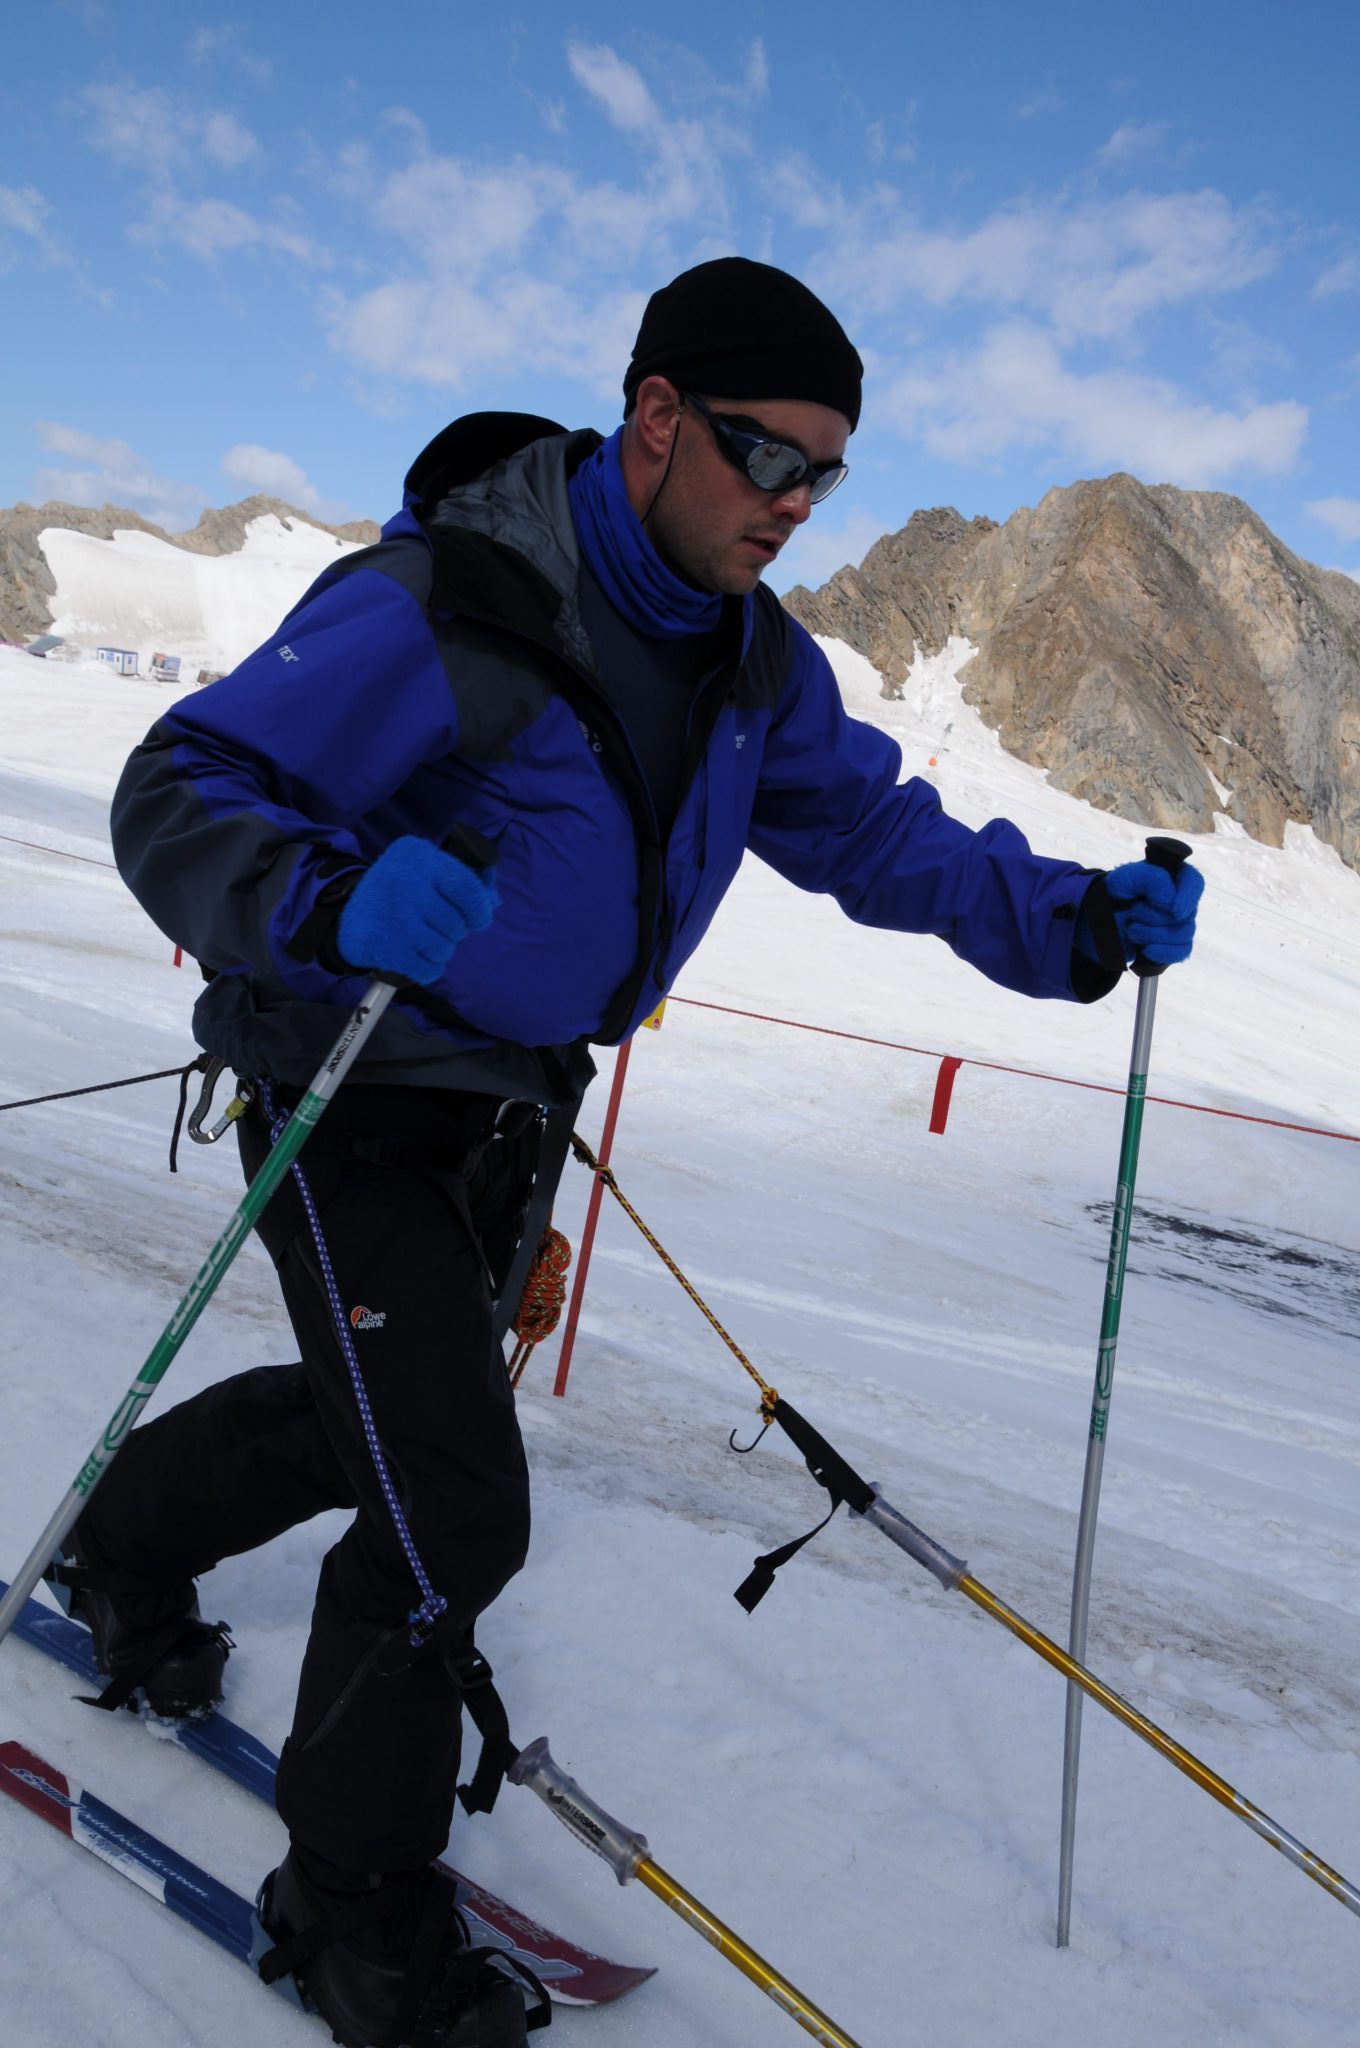 Mark Pollock, dressed in snow gear and dark glasses, skiing in snow